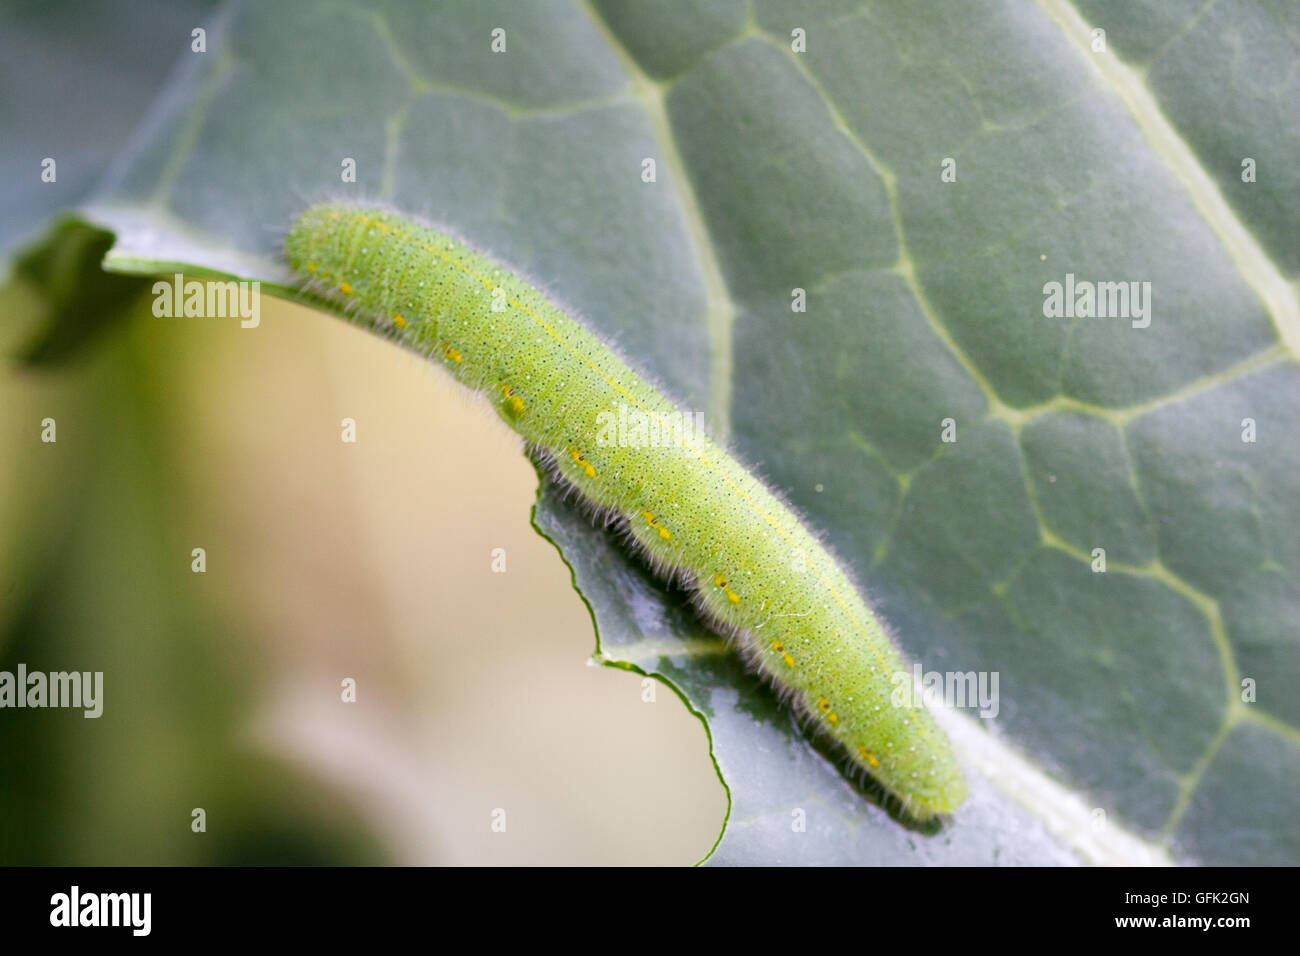 Larva of butterfly on the leaf Stock Photo